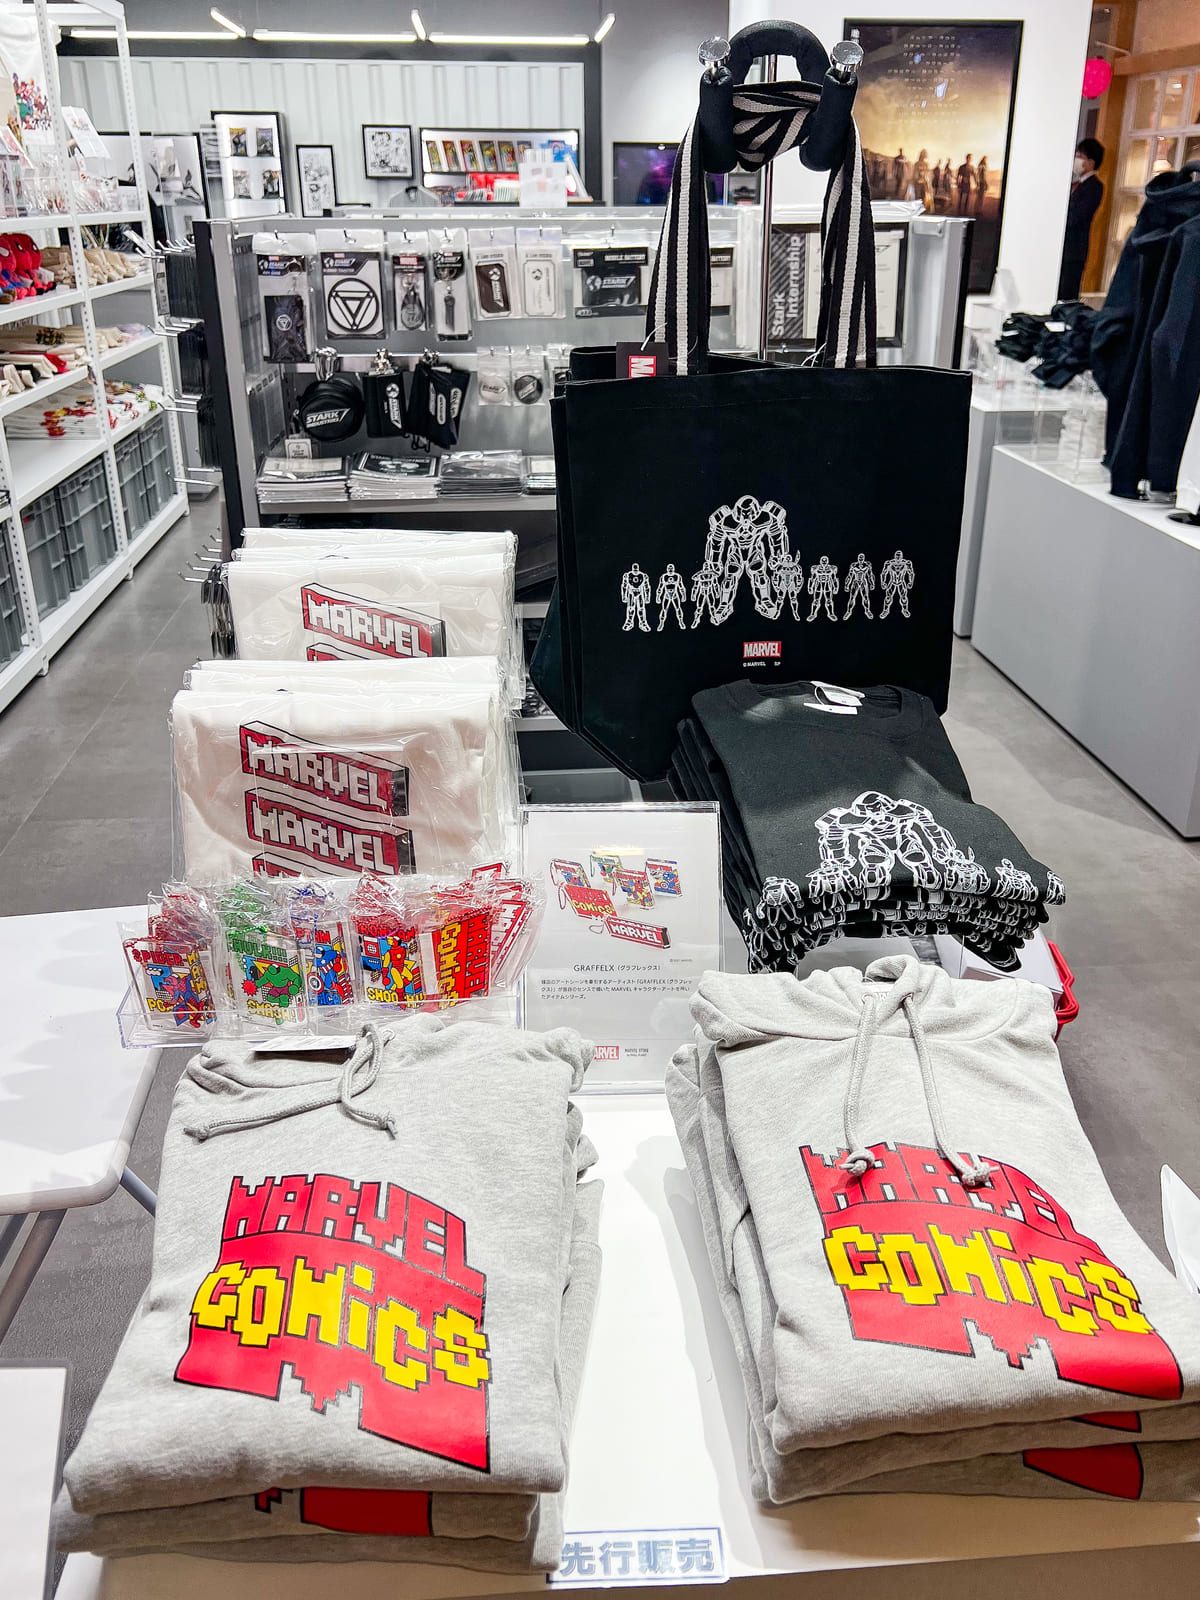 MARVEL STORE by SMALL PLANET 東京ソラマチ店　5